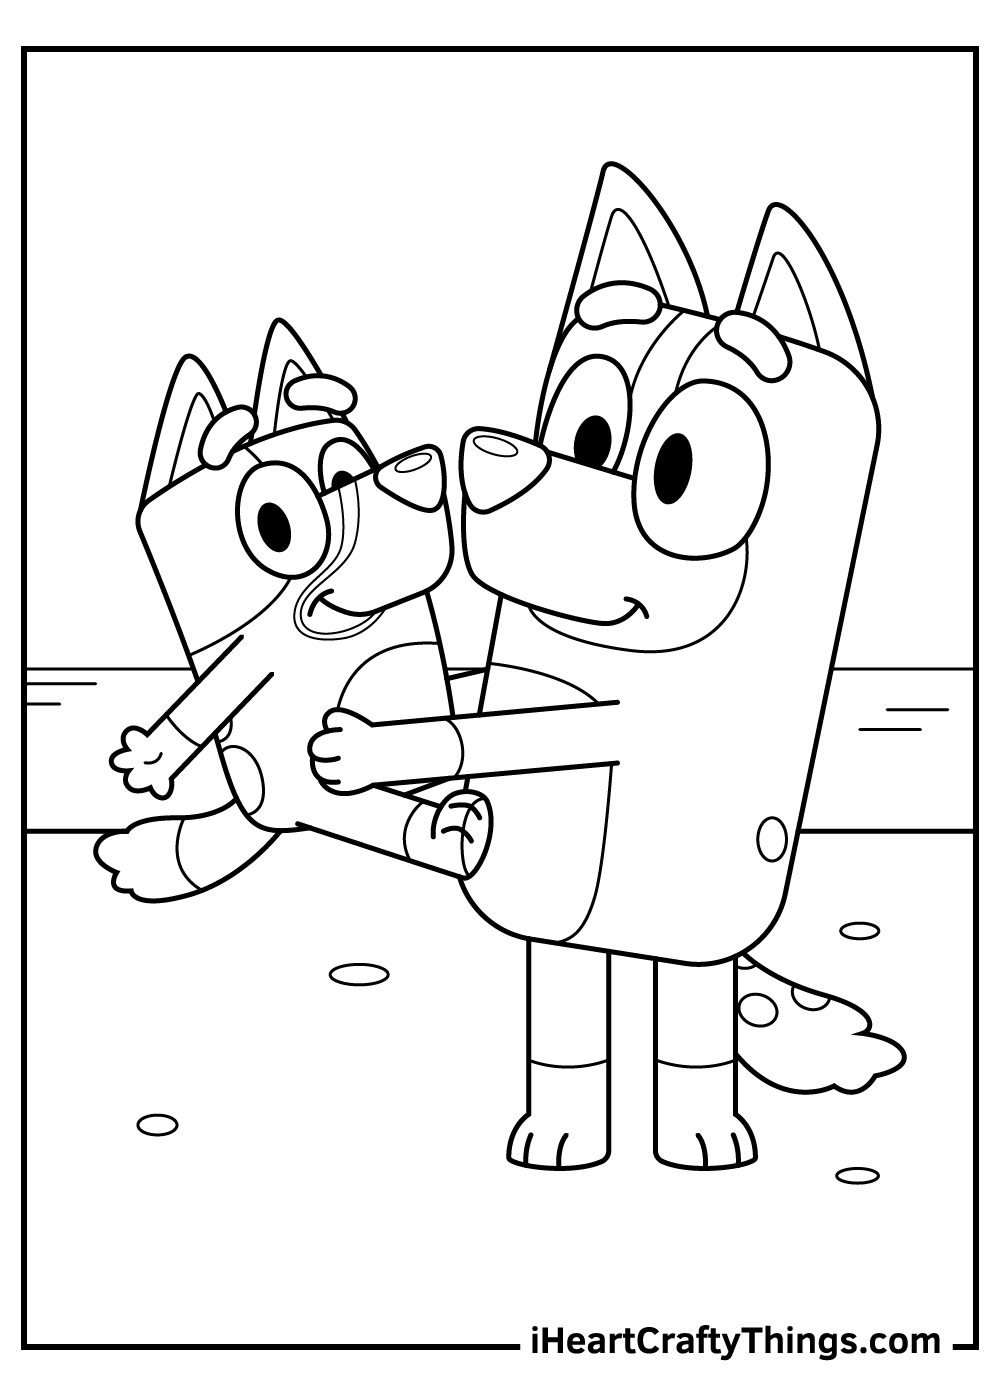 Coloring Book Bluey Coloring Pages Free / Bluey Coloring Pages Updated